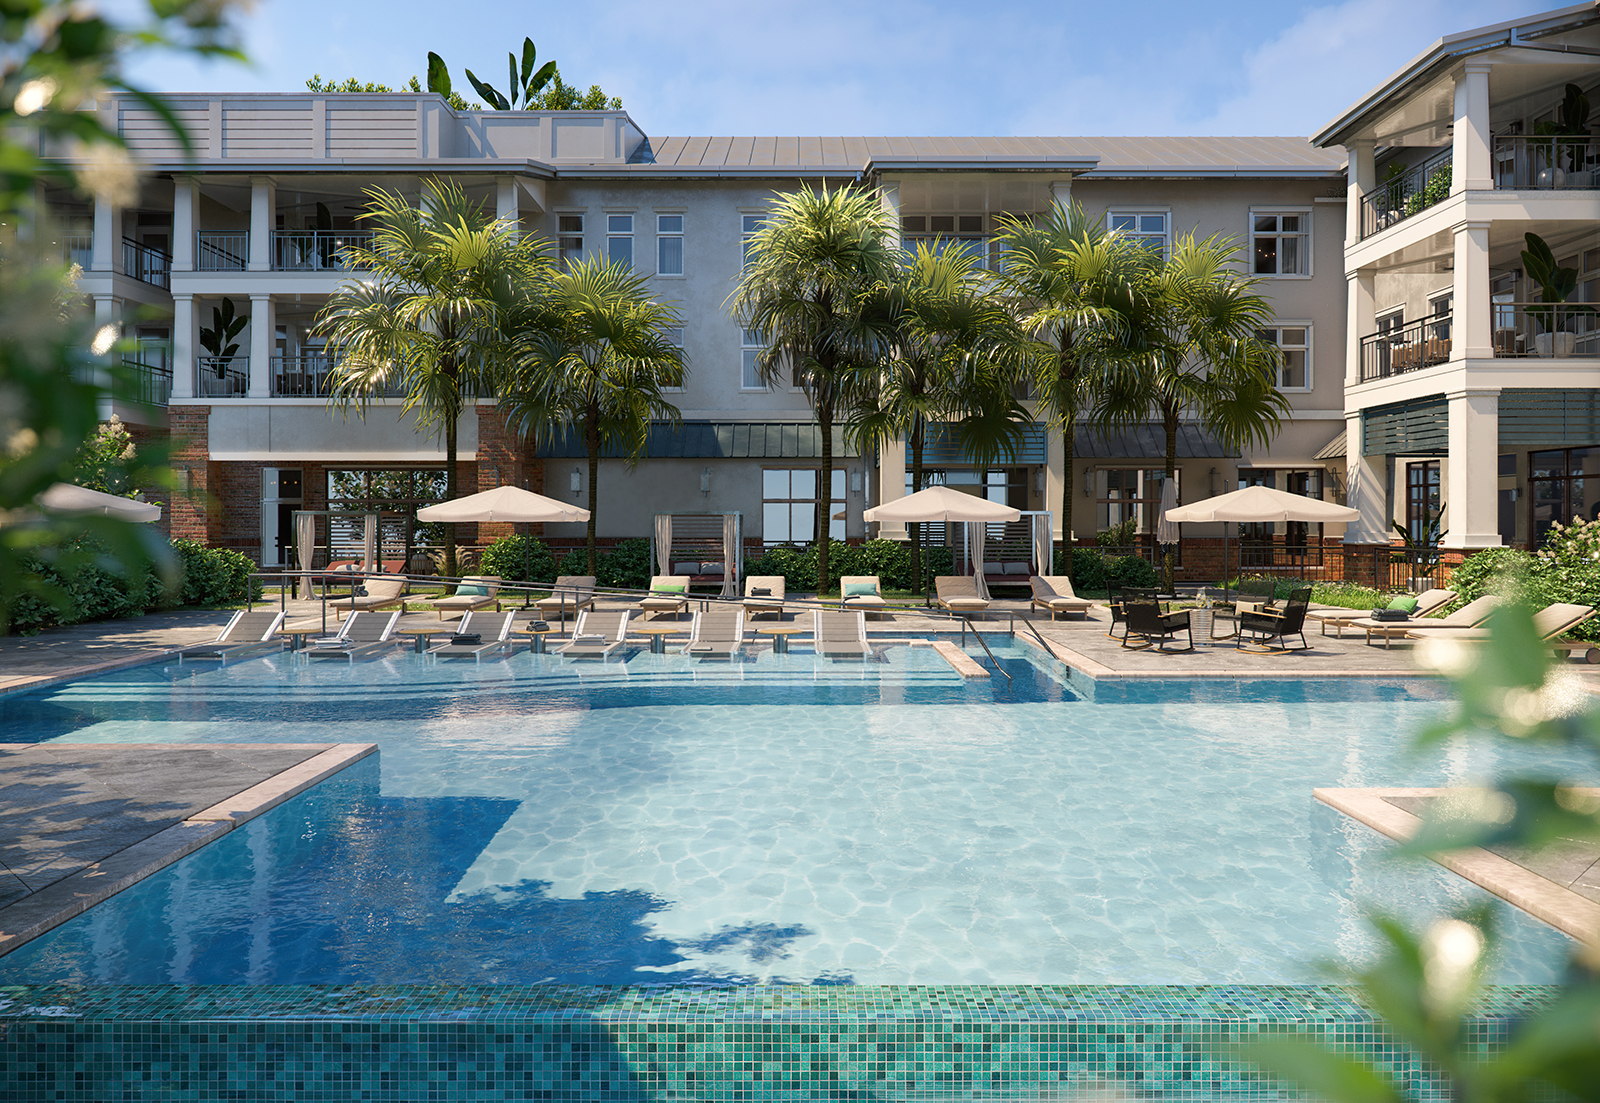 Lowcountry Senior Living - Outdoor swimming pool at Seafields at Kiawah Island